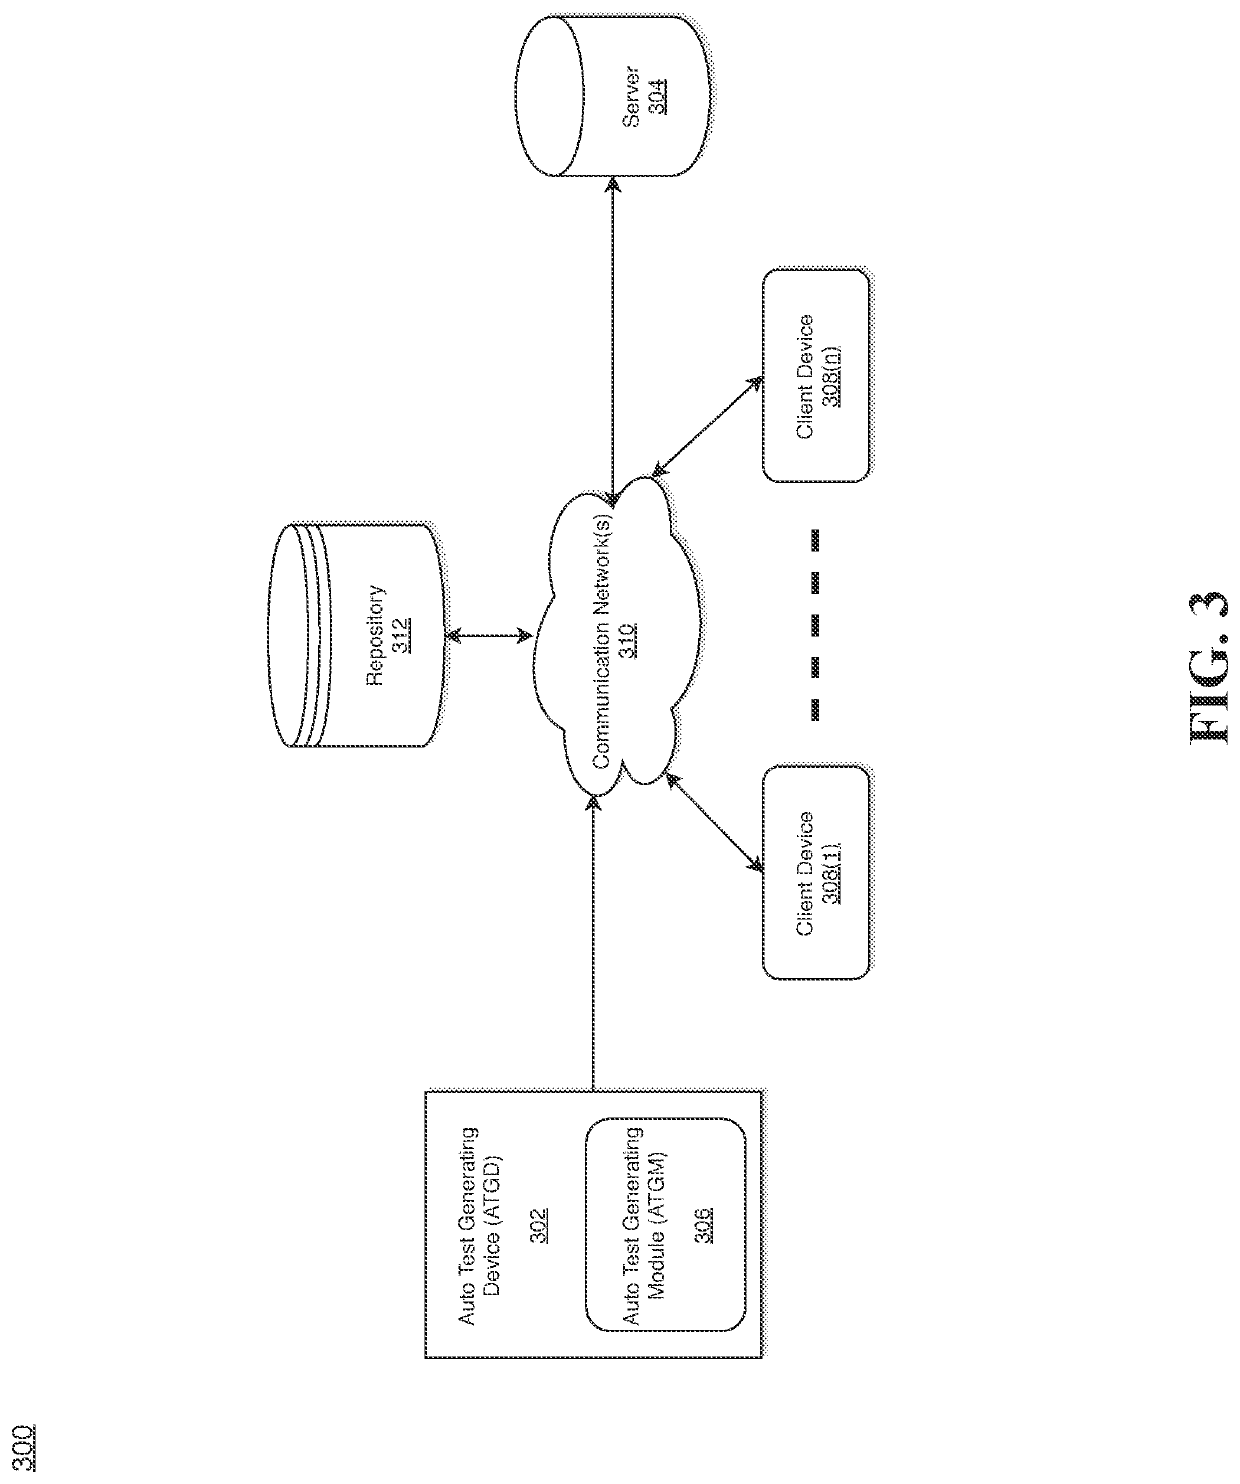 System and method for automatically generating executable tests in gherkin format